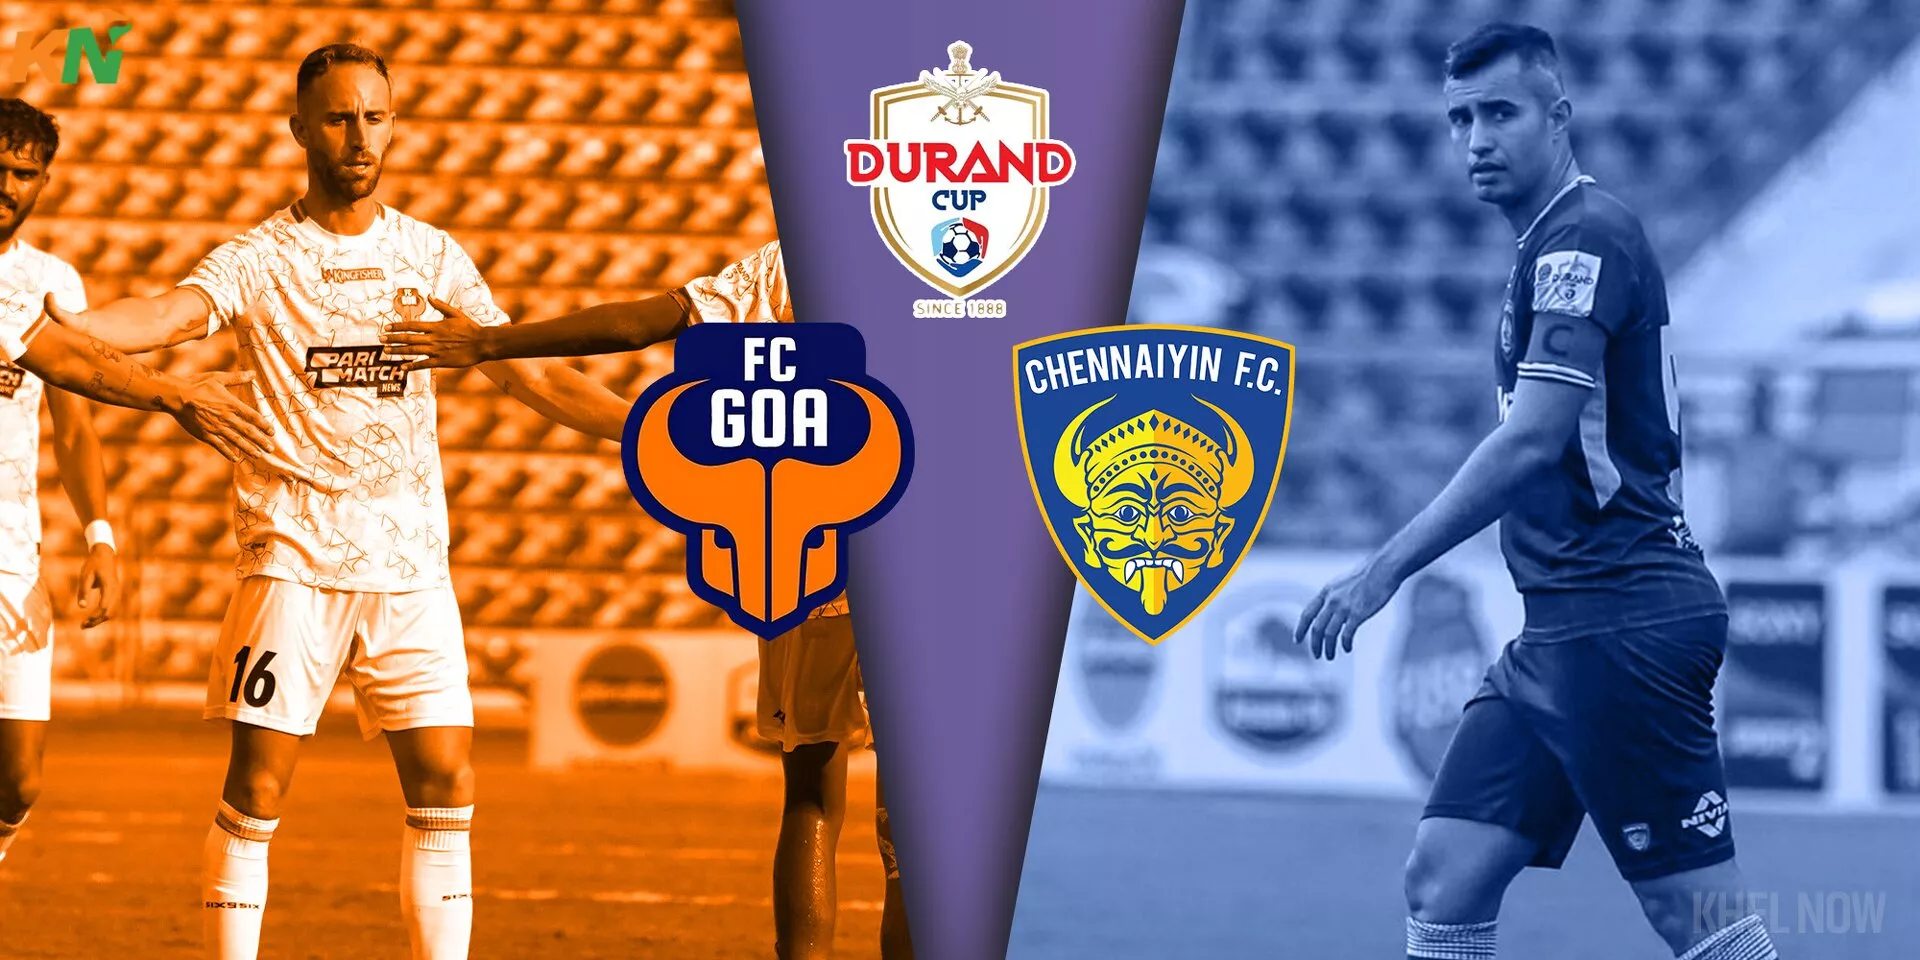 FC Goa and Chennaiyin FC players in action during a Durand Cup 2023 match